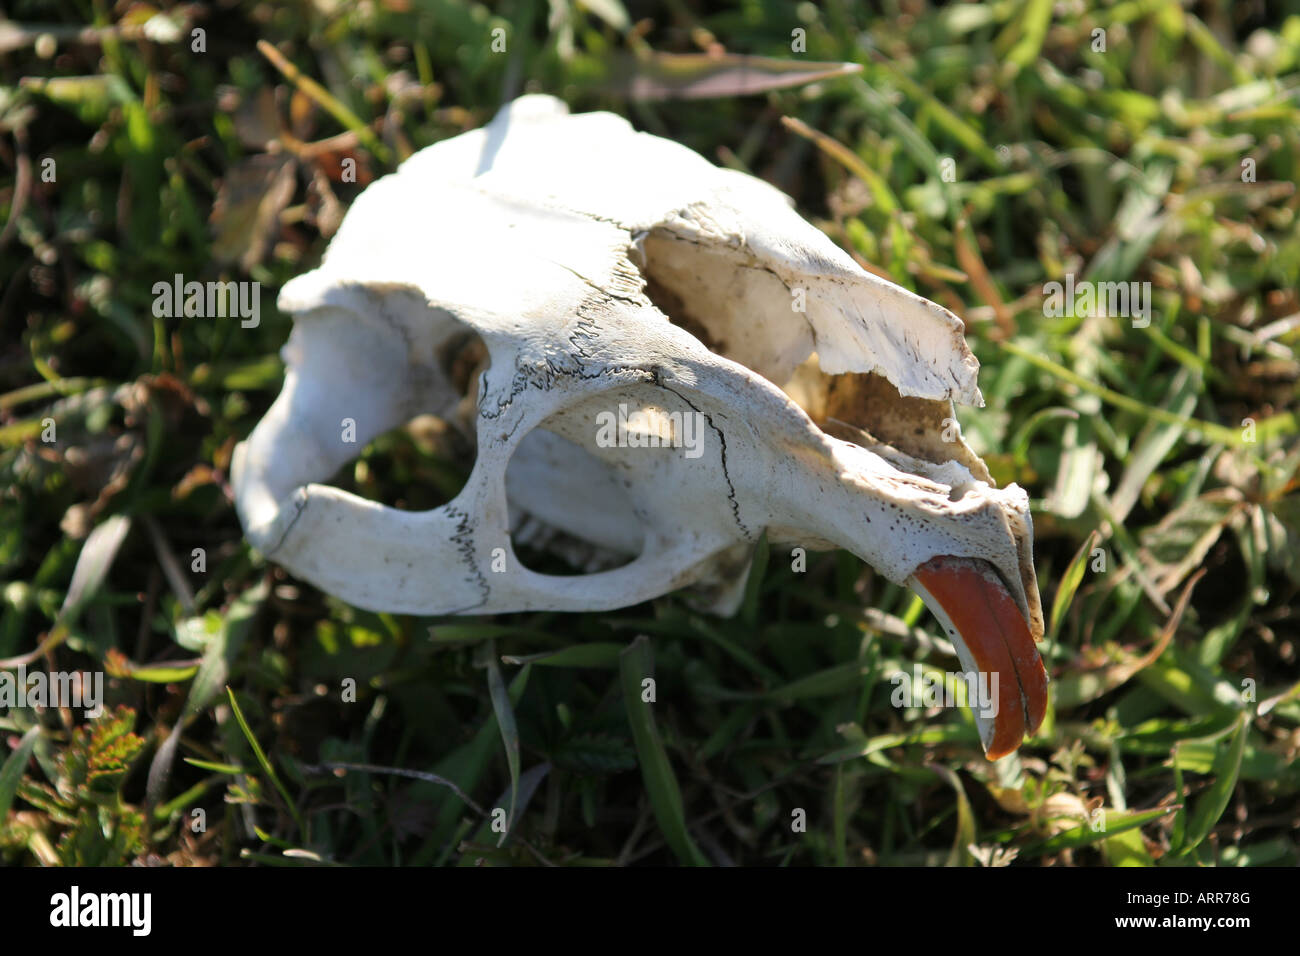 Remains of a white wild river died without food remains the orange beak and a little bit of white teeth under the palate Stock Photo